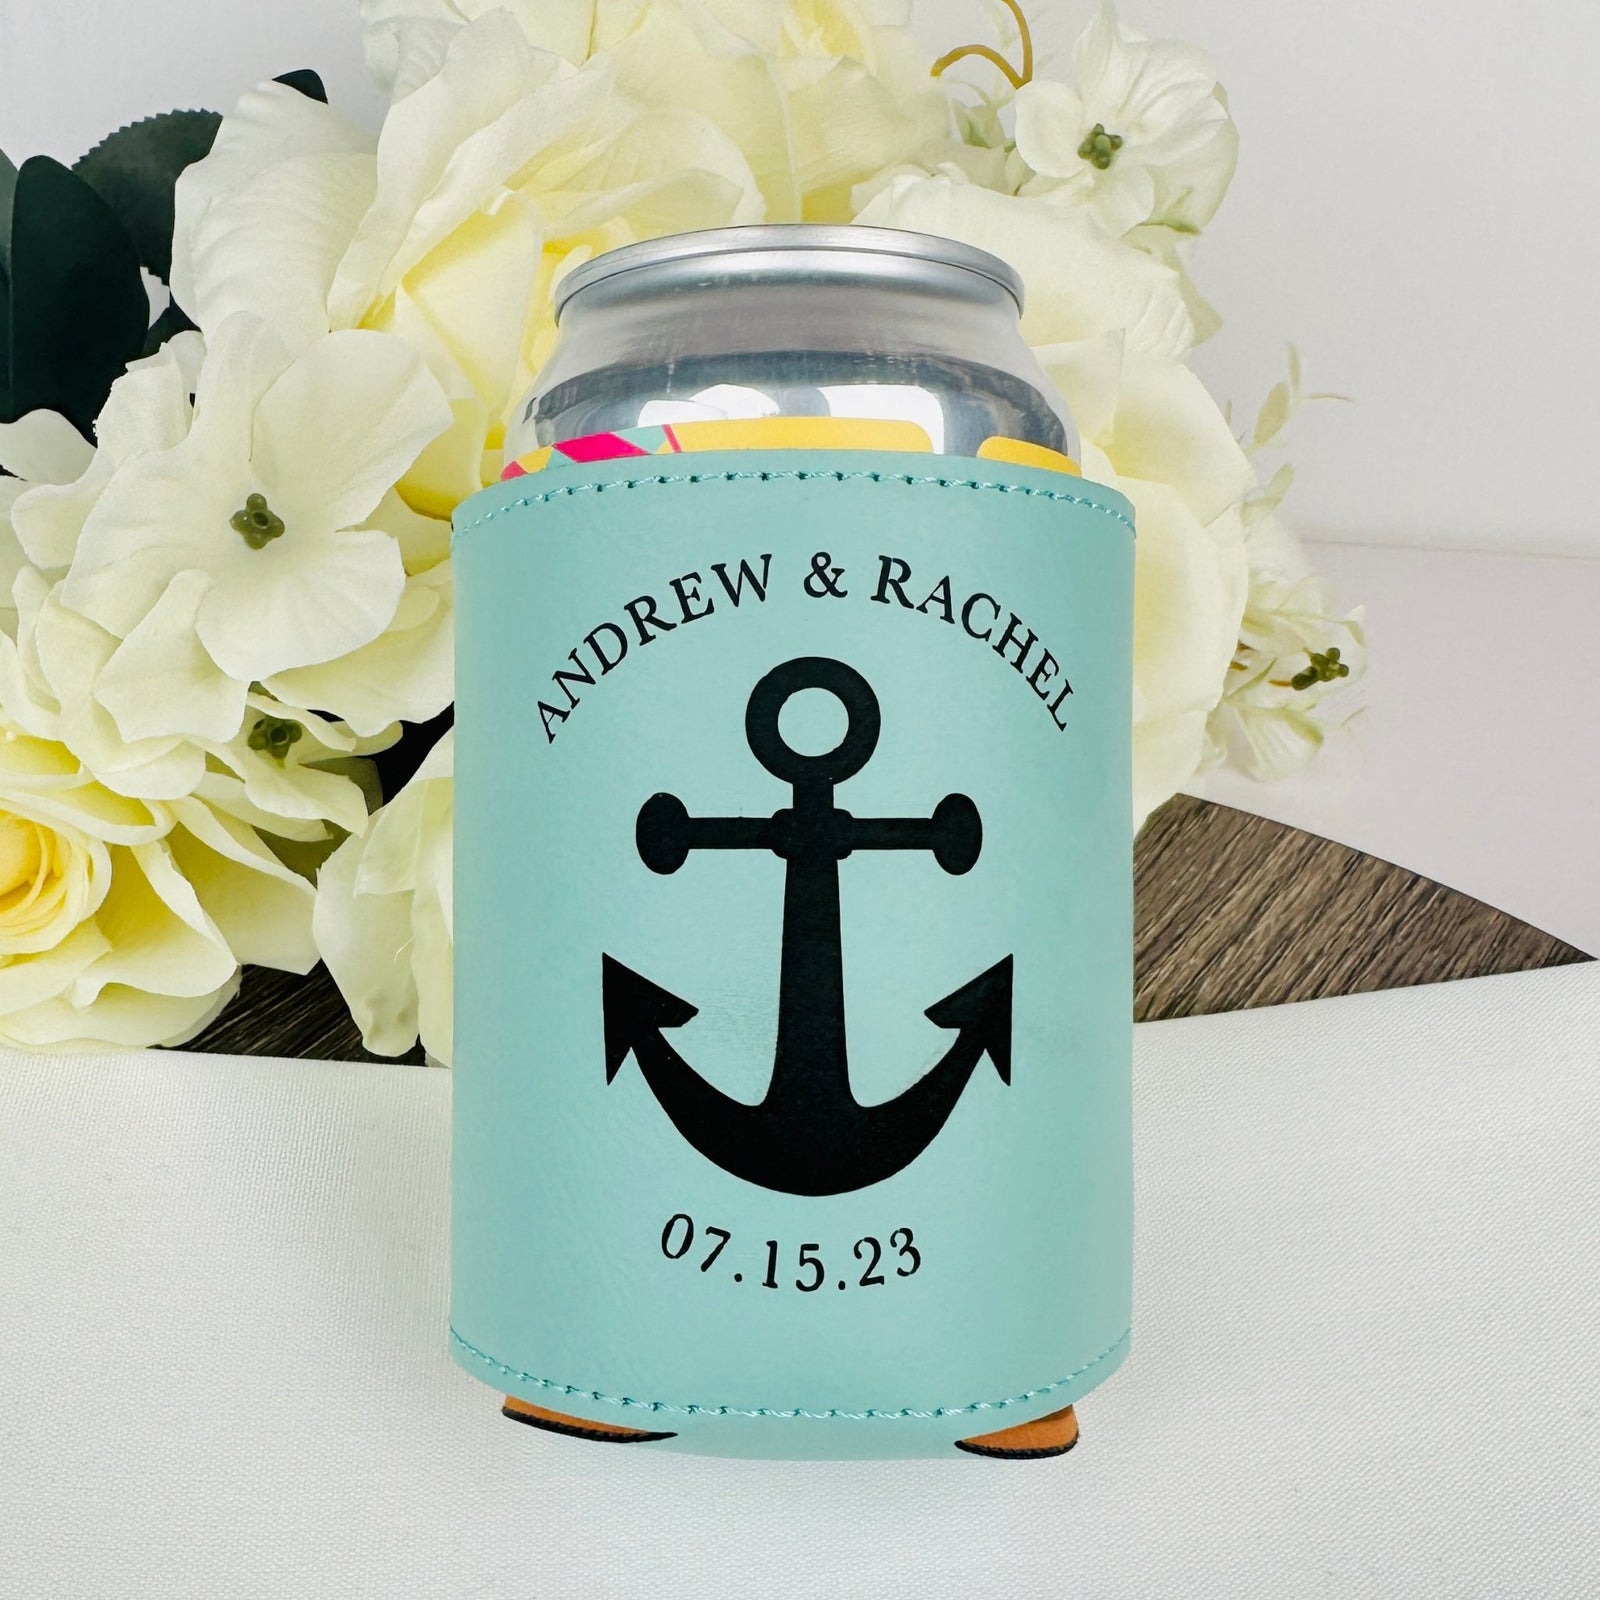 Koozie Holder, Weddings, Style and Décor, Wedding Forums